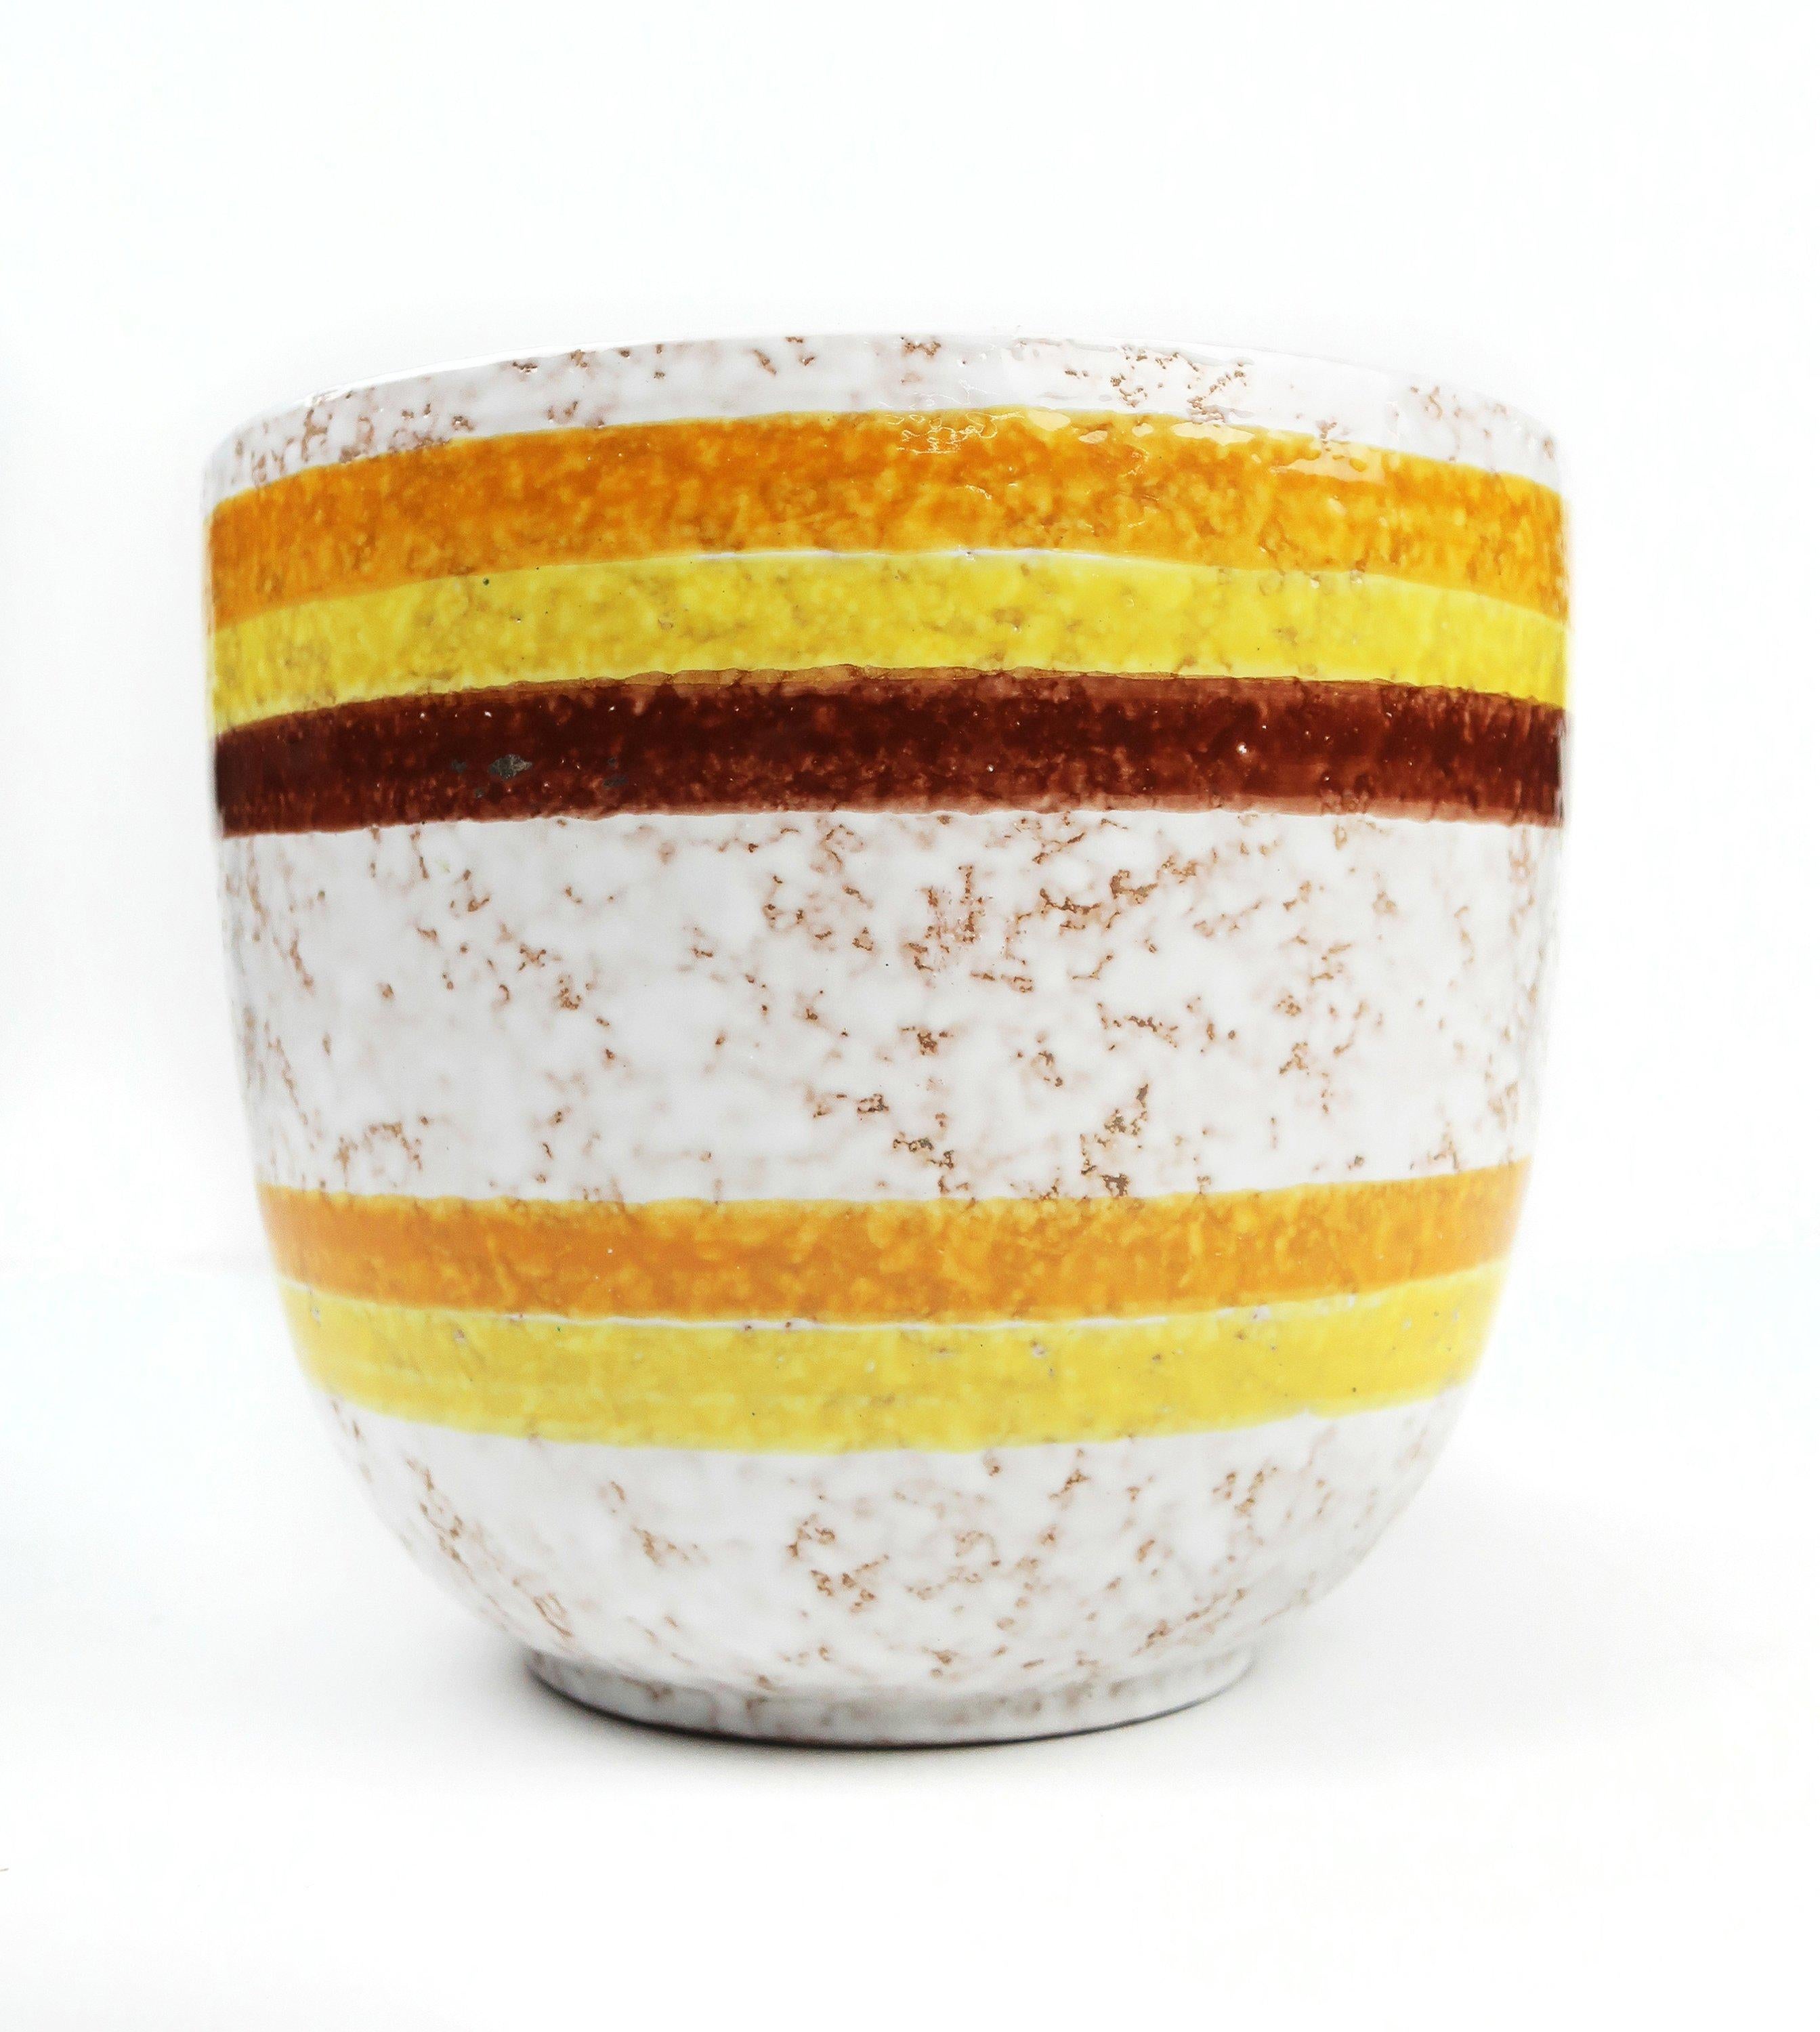 A large hand painted ceramic planter by Bitossi for Rosenthal Netter. Hand painted white glaze with yellow, orange, and maroon stripes. In excellent vintage condition with no signs of wear, use, or damage.

Marked on base 